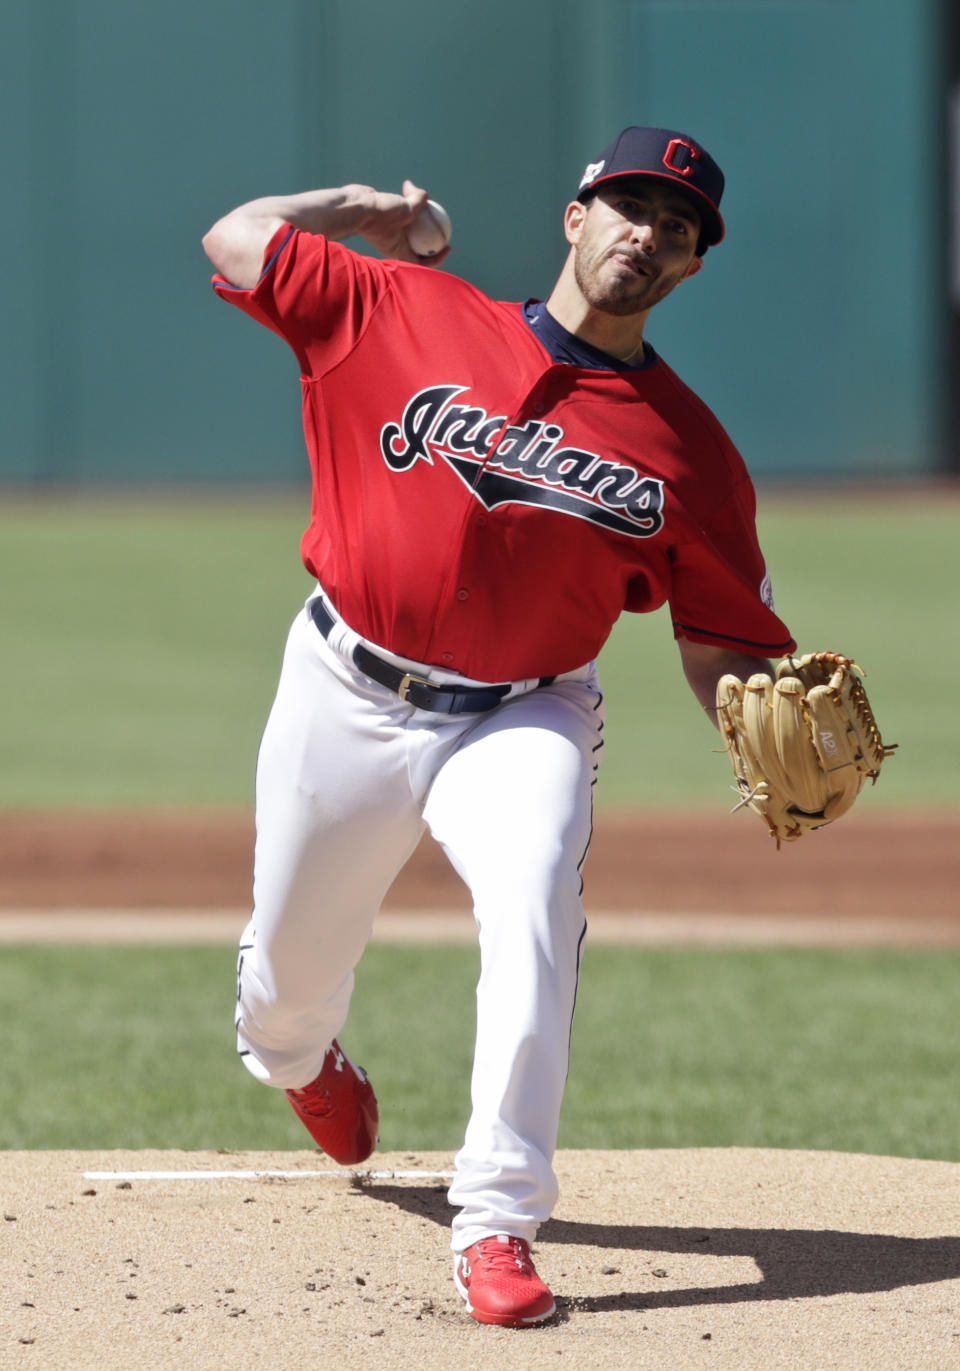 Cleveland Indians starting pitcher Aaron Civale delivers in the first inning of a baseball game against the Detroit Tigers, Saturday, June 22, 2019, in Cleveland. (AP Photo/Tony Dejak)